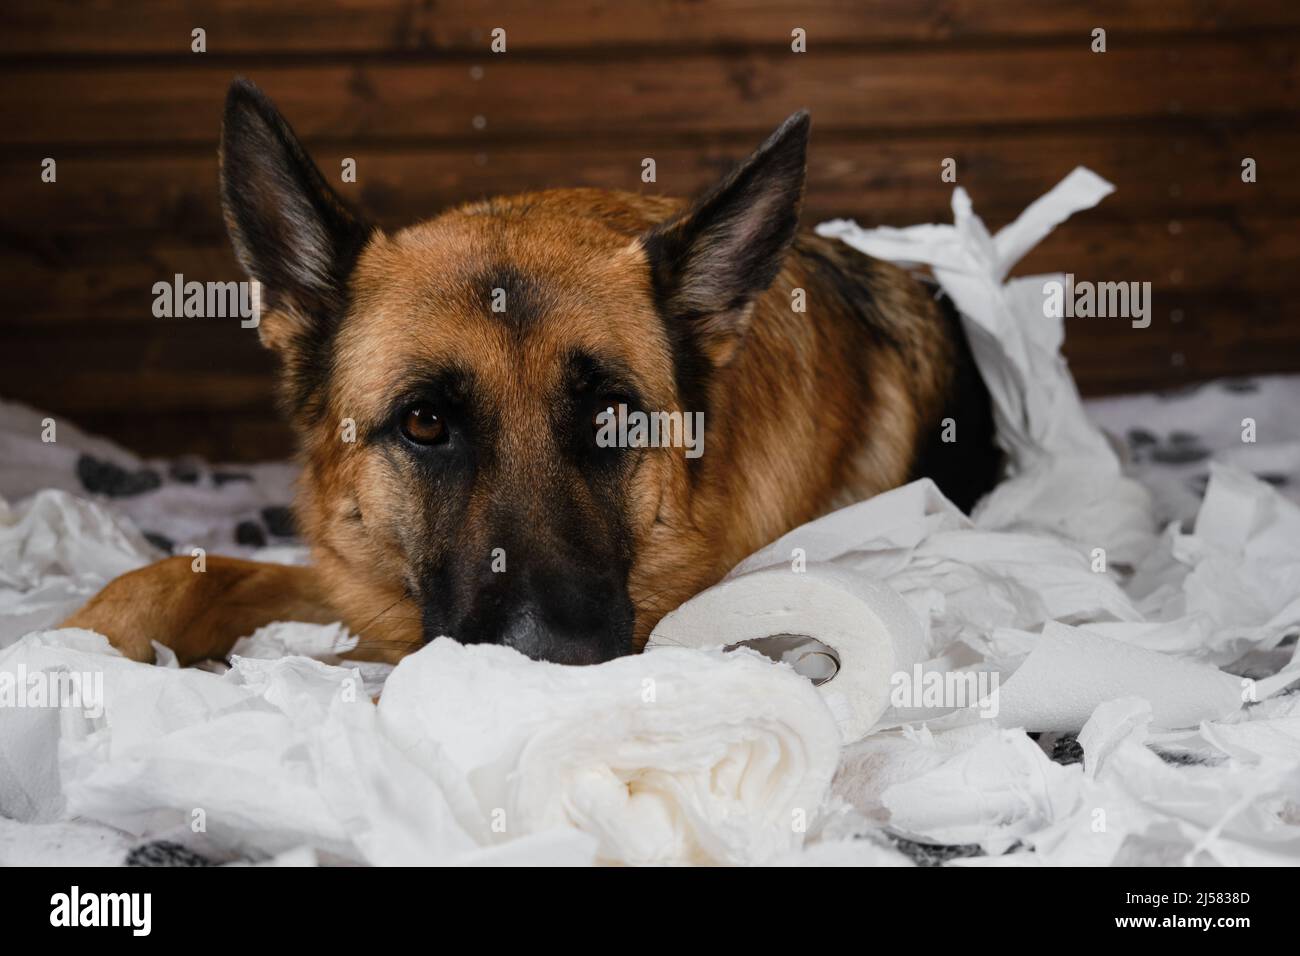 Dog is alone at home entertaining by eating toilet paper. Charming German Shepherd dog playing with paper lying on bed. Young crazy dog is making mess Stock Photo